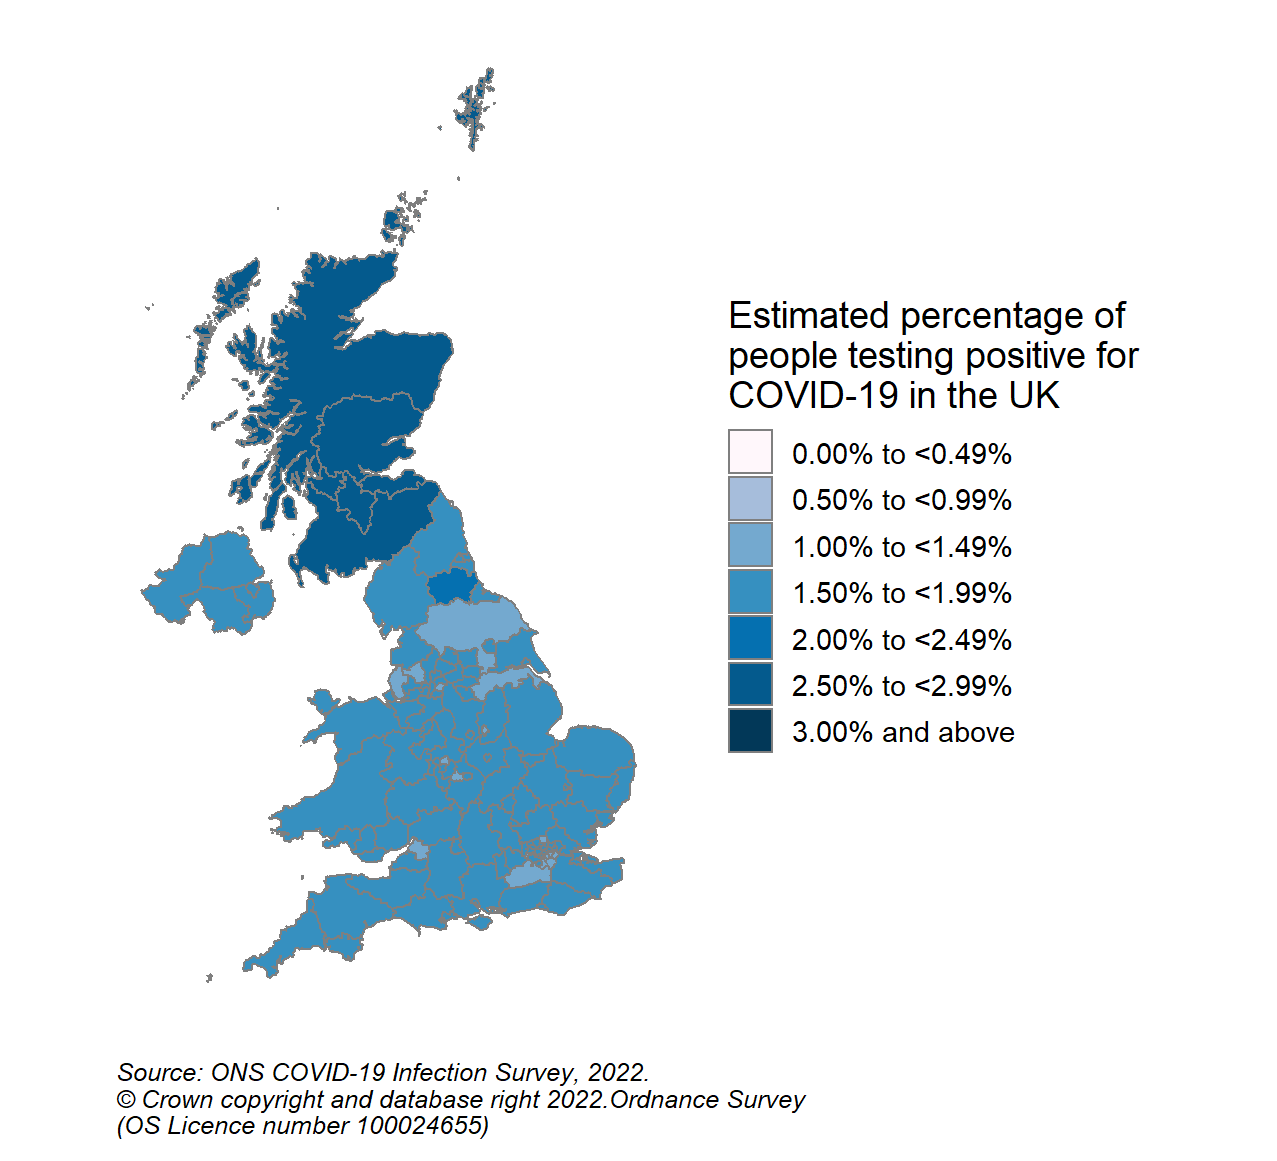 This colour coded map of the UK shows the modelled estimates of the percentage of the private residential population testing positive for COVID-19, by COVID-19 Infection Survey sub-regions. In Scotland, these sub-regions are comprised of Health Boards. The regions are: 123 - NHS Grampian, NHS Highland, NHS Orkney, NHS Shetland and NHS Western Isles, 124 - NHS Fife, NHS Forth Valley and NHS Tayside, 125 - NHS Greater Glasgow & Clyde, 126 - NHS Lothian, 127 - NHS Lanarkshire, 128 - NHS Ayrshire & Arran, NHS Borders and NHS Dumfries & Galloway.  In the most recent week (15 to 21 May 2022), estimates for the percentage of people testing positive were similar for all CIS Regions in Scotland and ranged from 2.65% in CIS Region 126 (NHS Lothian) (95% credible interval: 2.21% to 3.17%) to 2.87% in CIS Region 127 (NHS Lanarkshire) (95% credible interval: 2.40% to 3.43%).